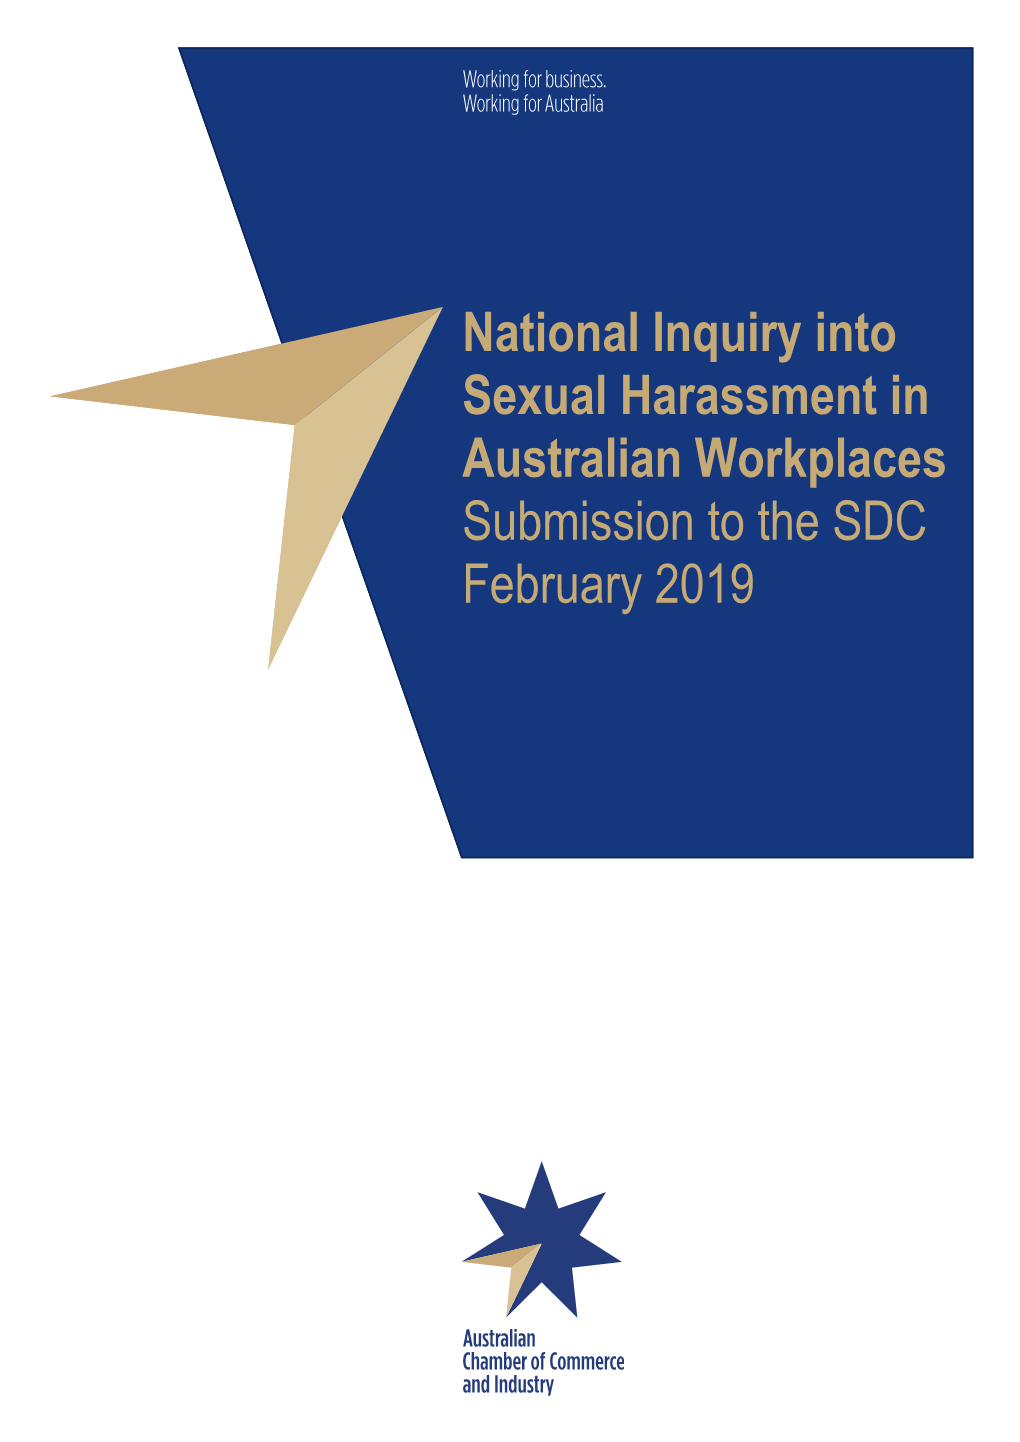 National Inquiry Into Sexual Harassment in Australian Workplaces Submission to the SDC February 2019